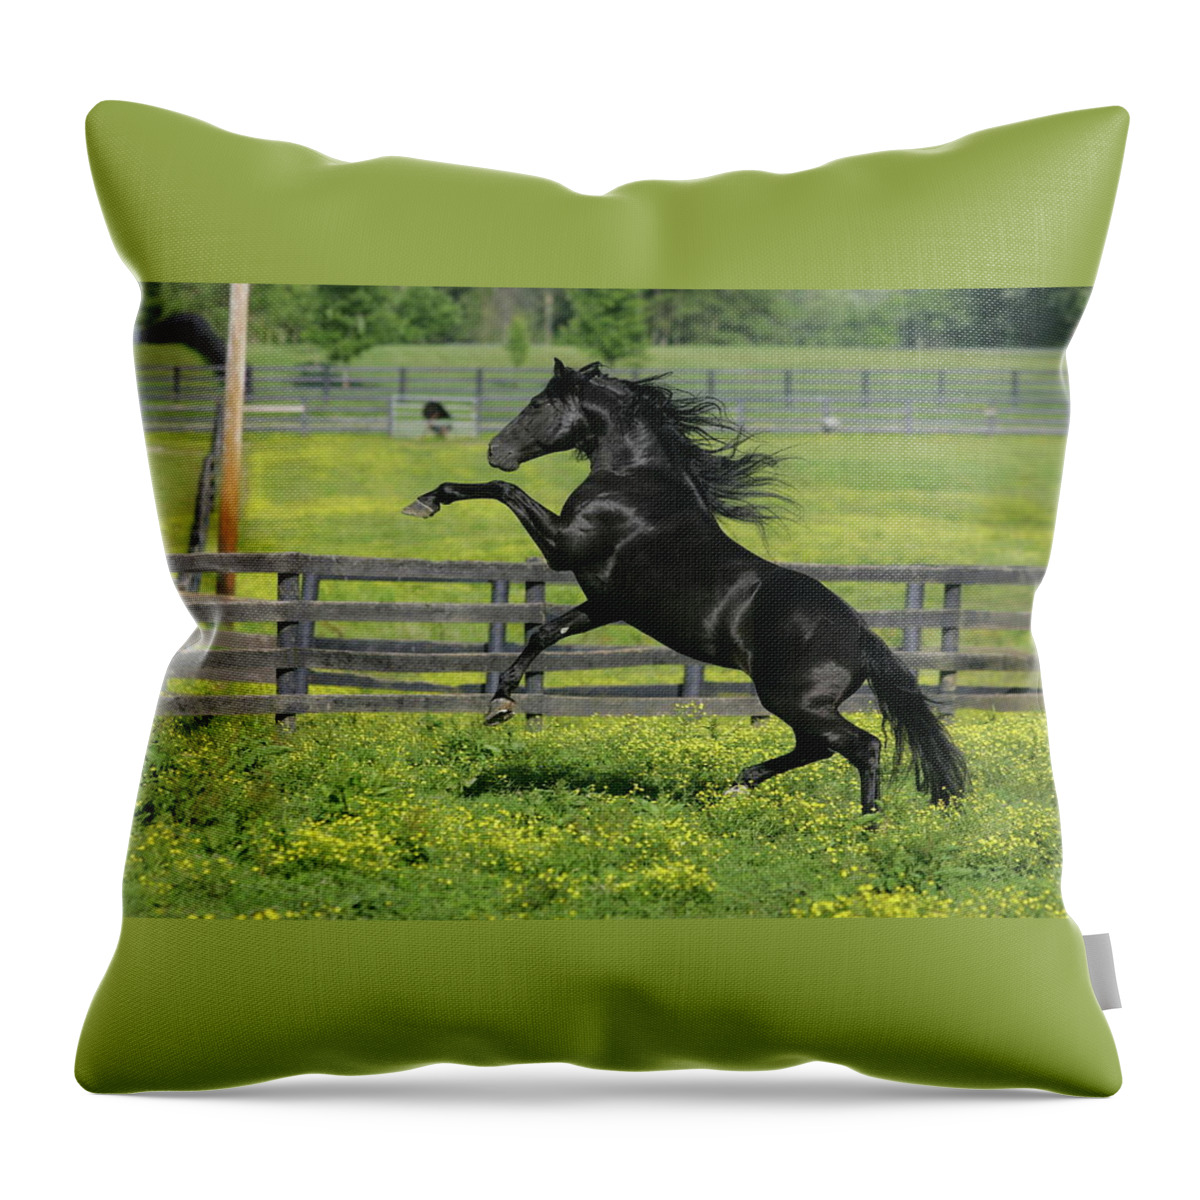 Horse Throw Pillow featuring the digital art Horse #23 by Super Lovely